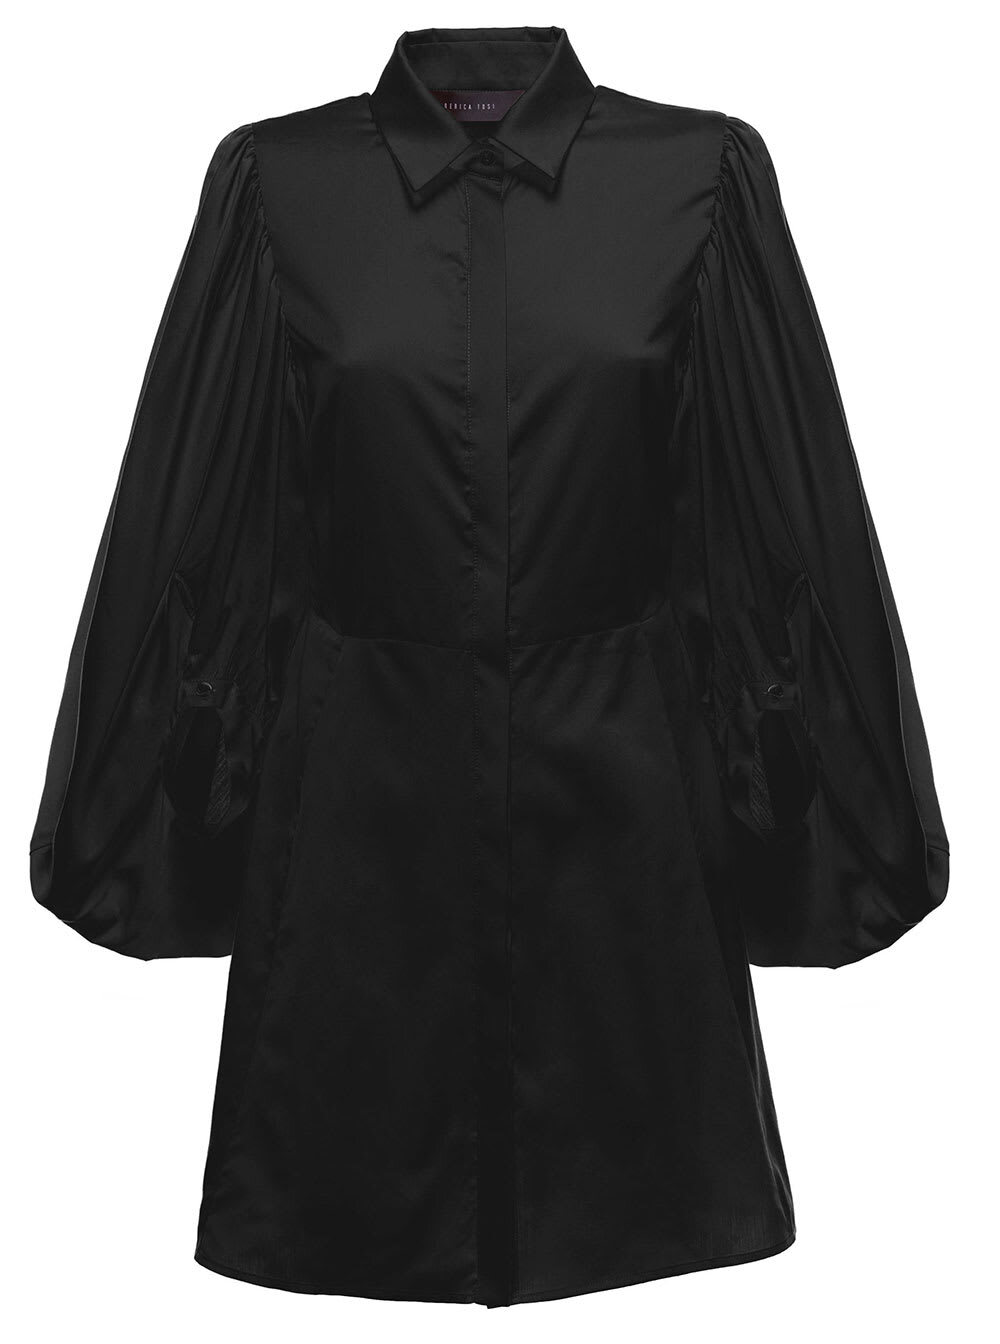 Federica Tosi Black Cotton And Silk Dress With Balloon Sleeves